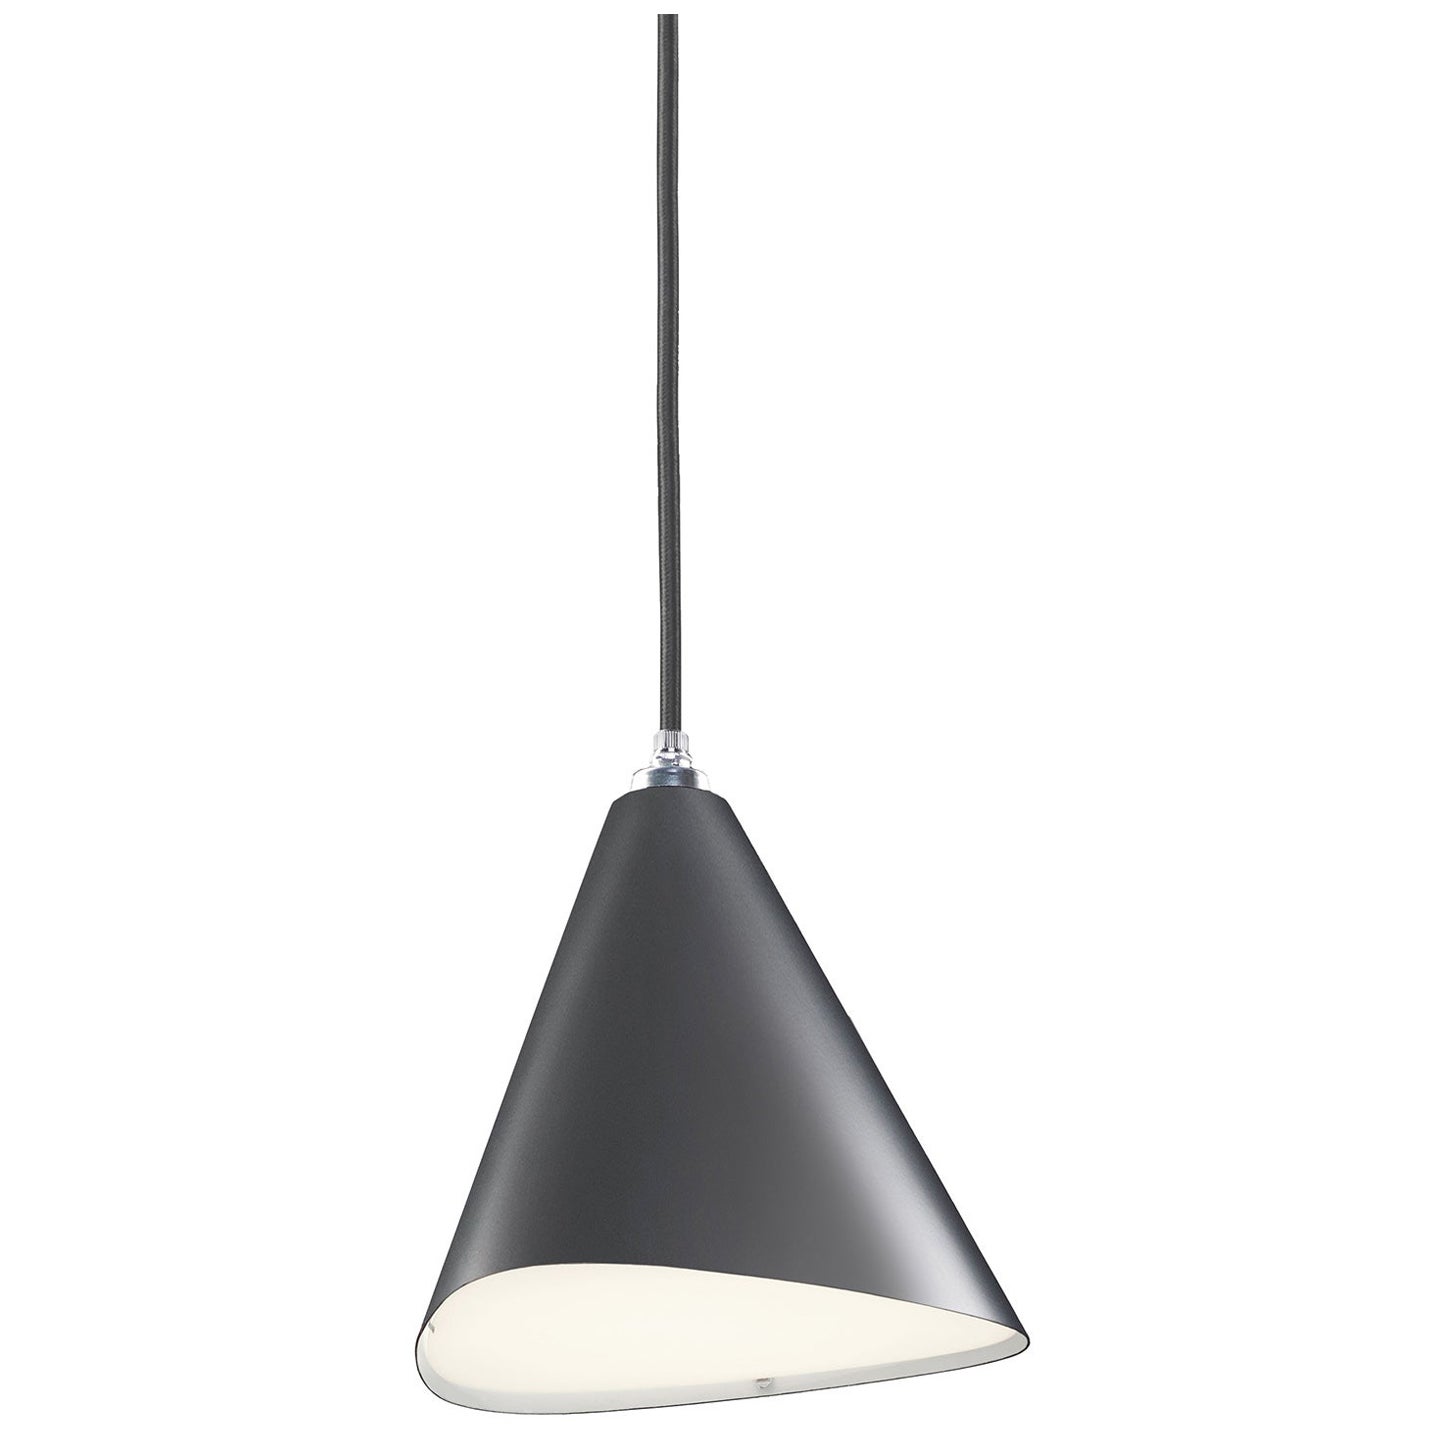 Daniel Becker 'Emily III' Pendant Lamp in Anthracite for Moss Objects For Sale